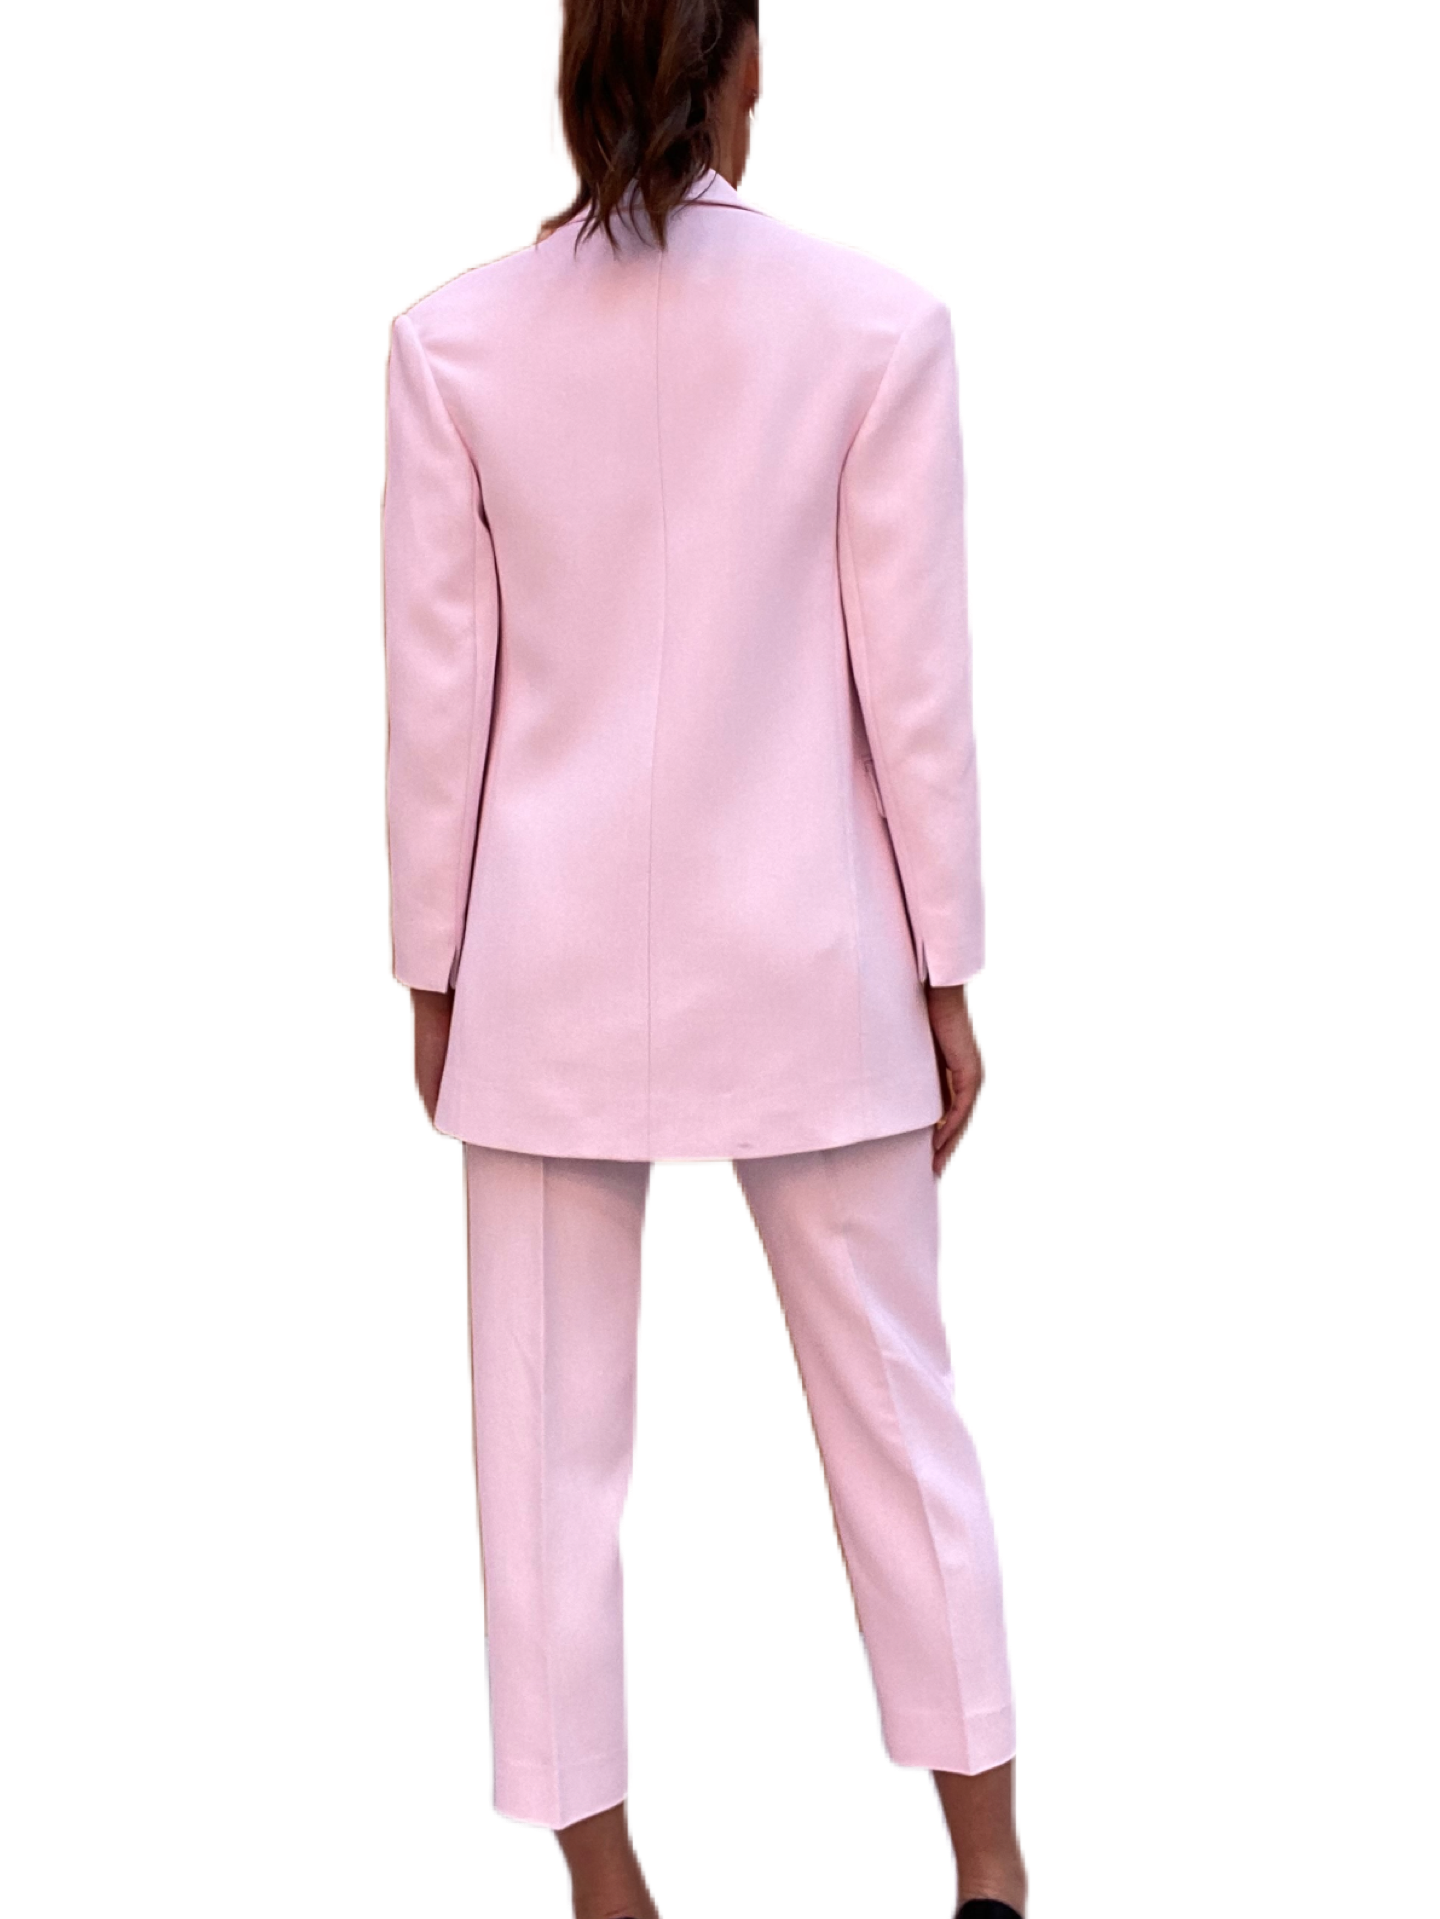 Scanlan Theodore Pink Pants Suit. Size: 6